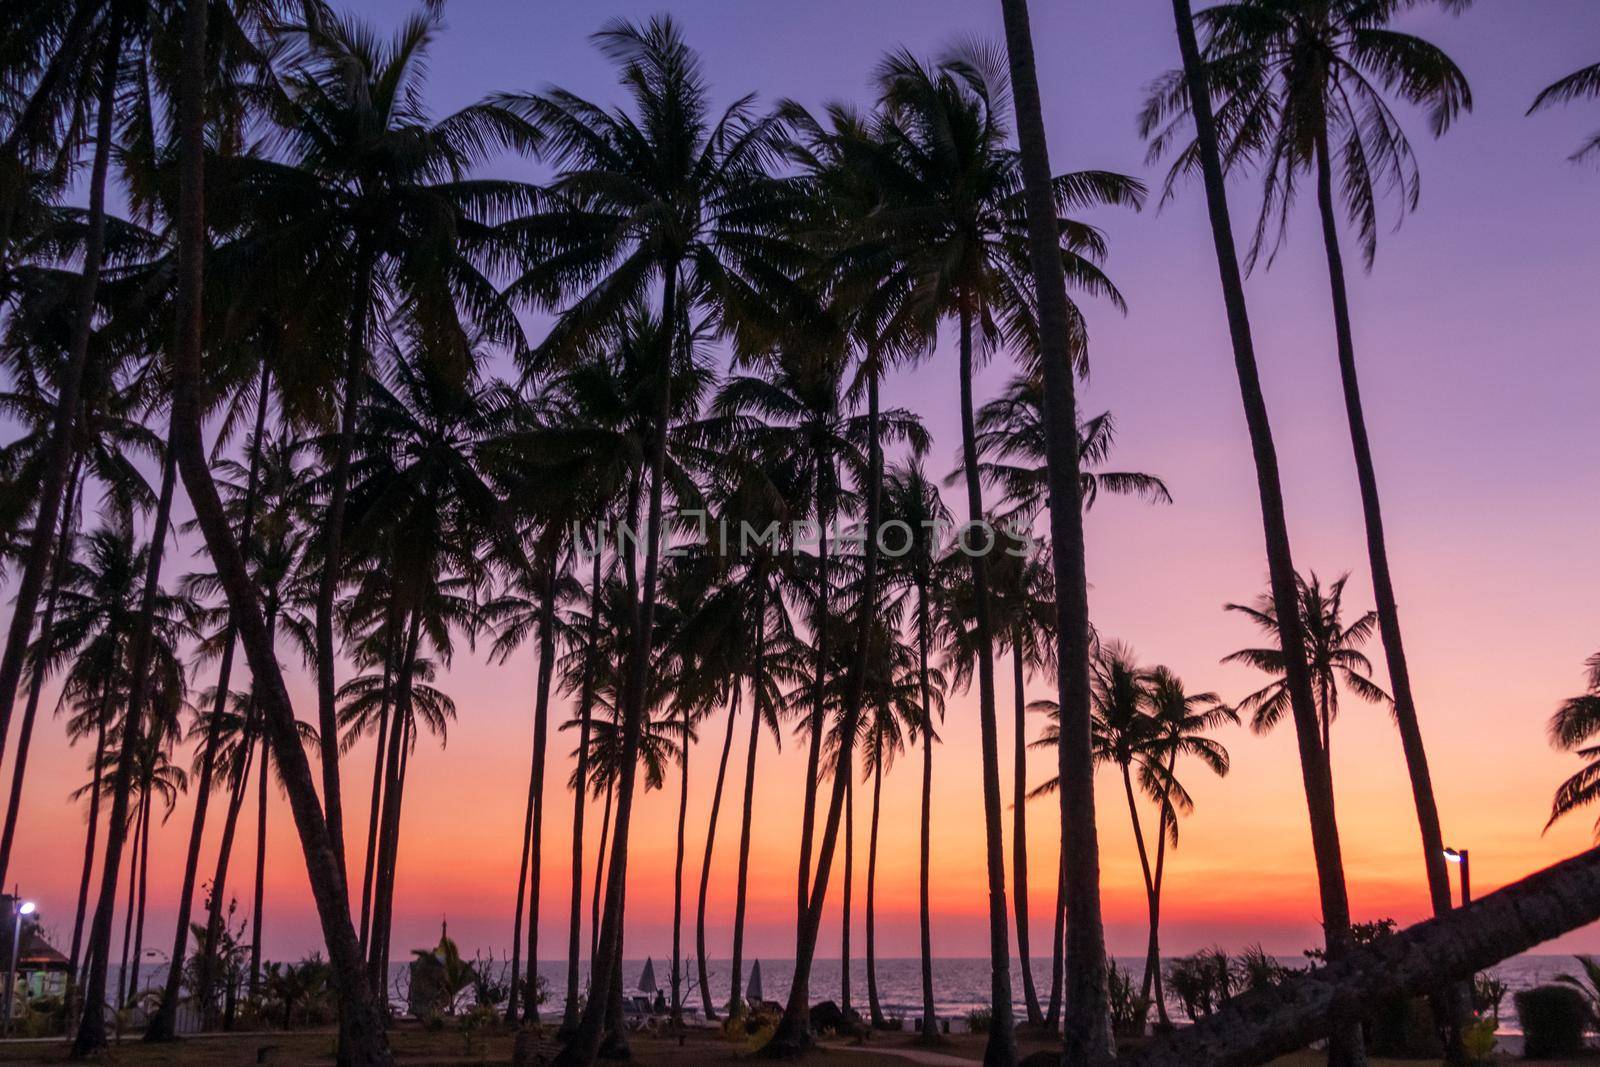 Palm trees at beach at dusk by imagesbykenny